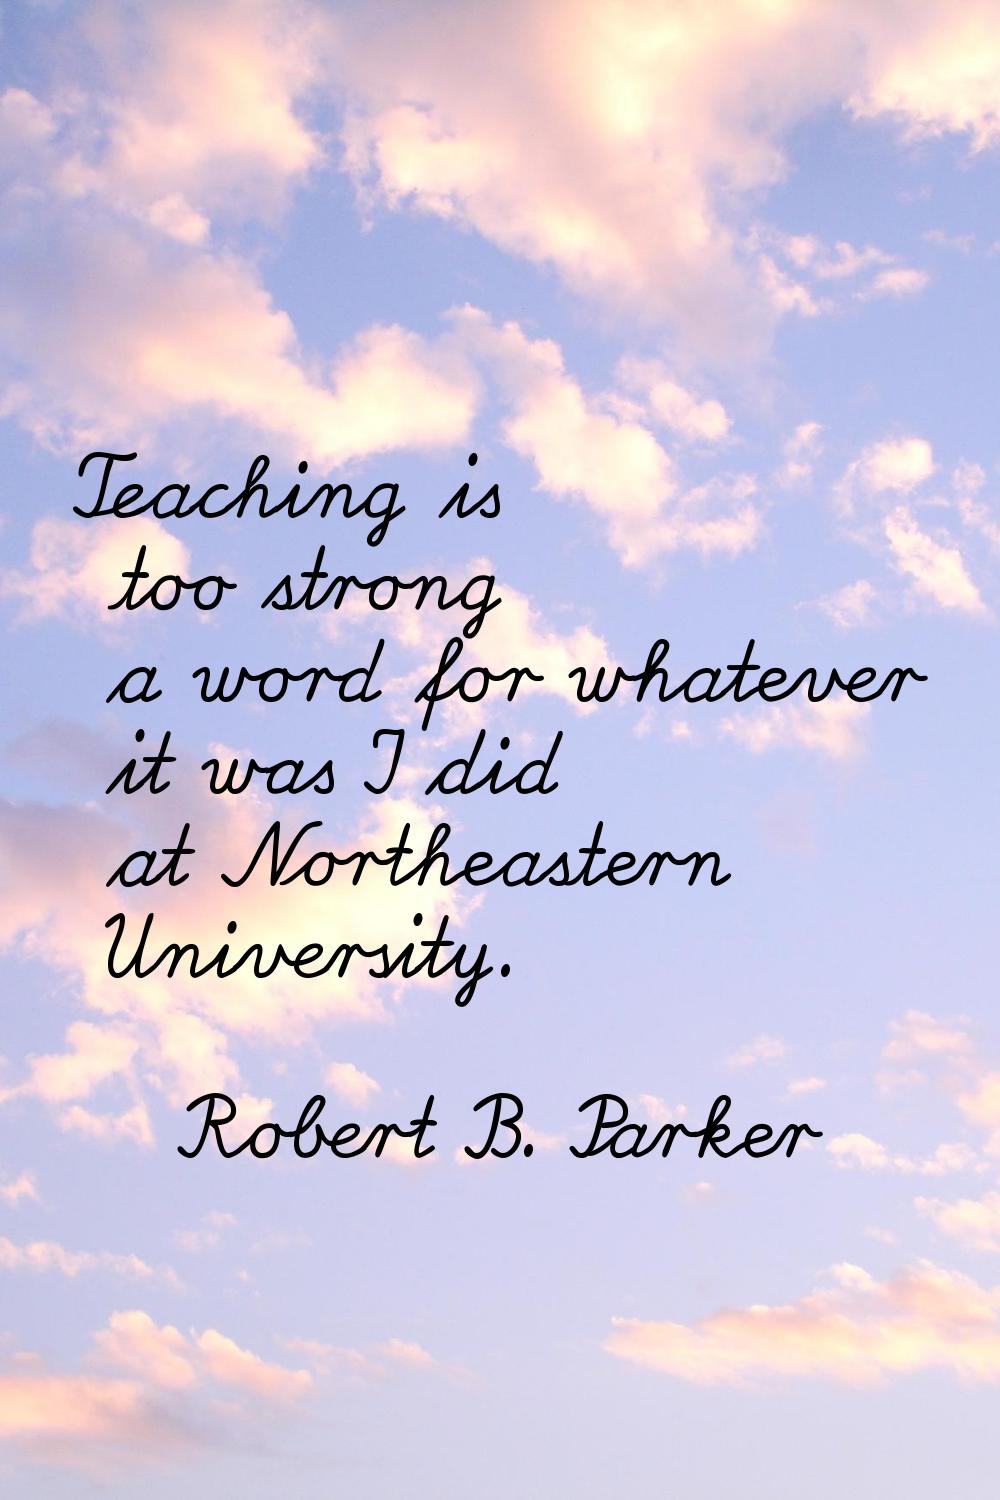 Teaching is too strong a word for whatever it was I did at Northeastern University.